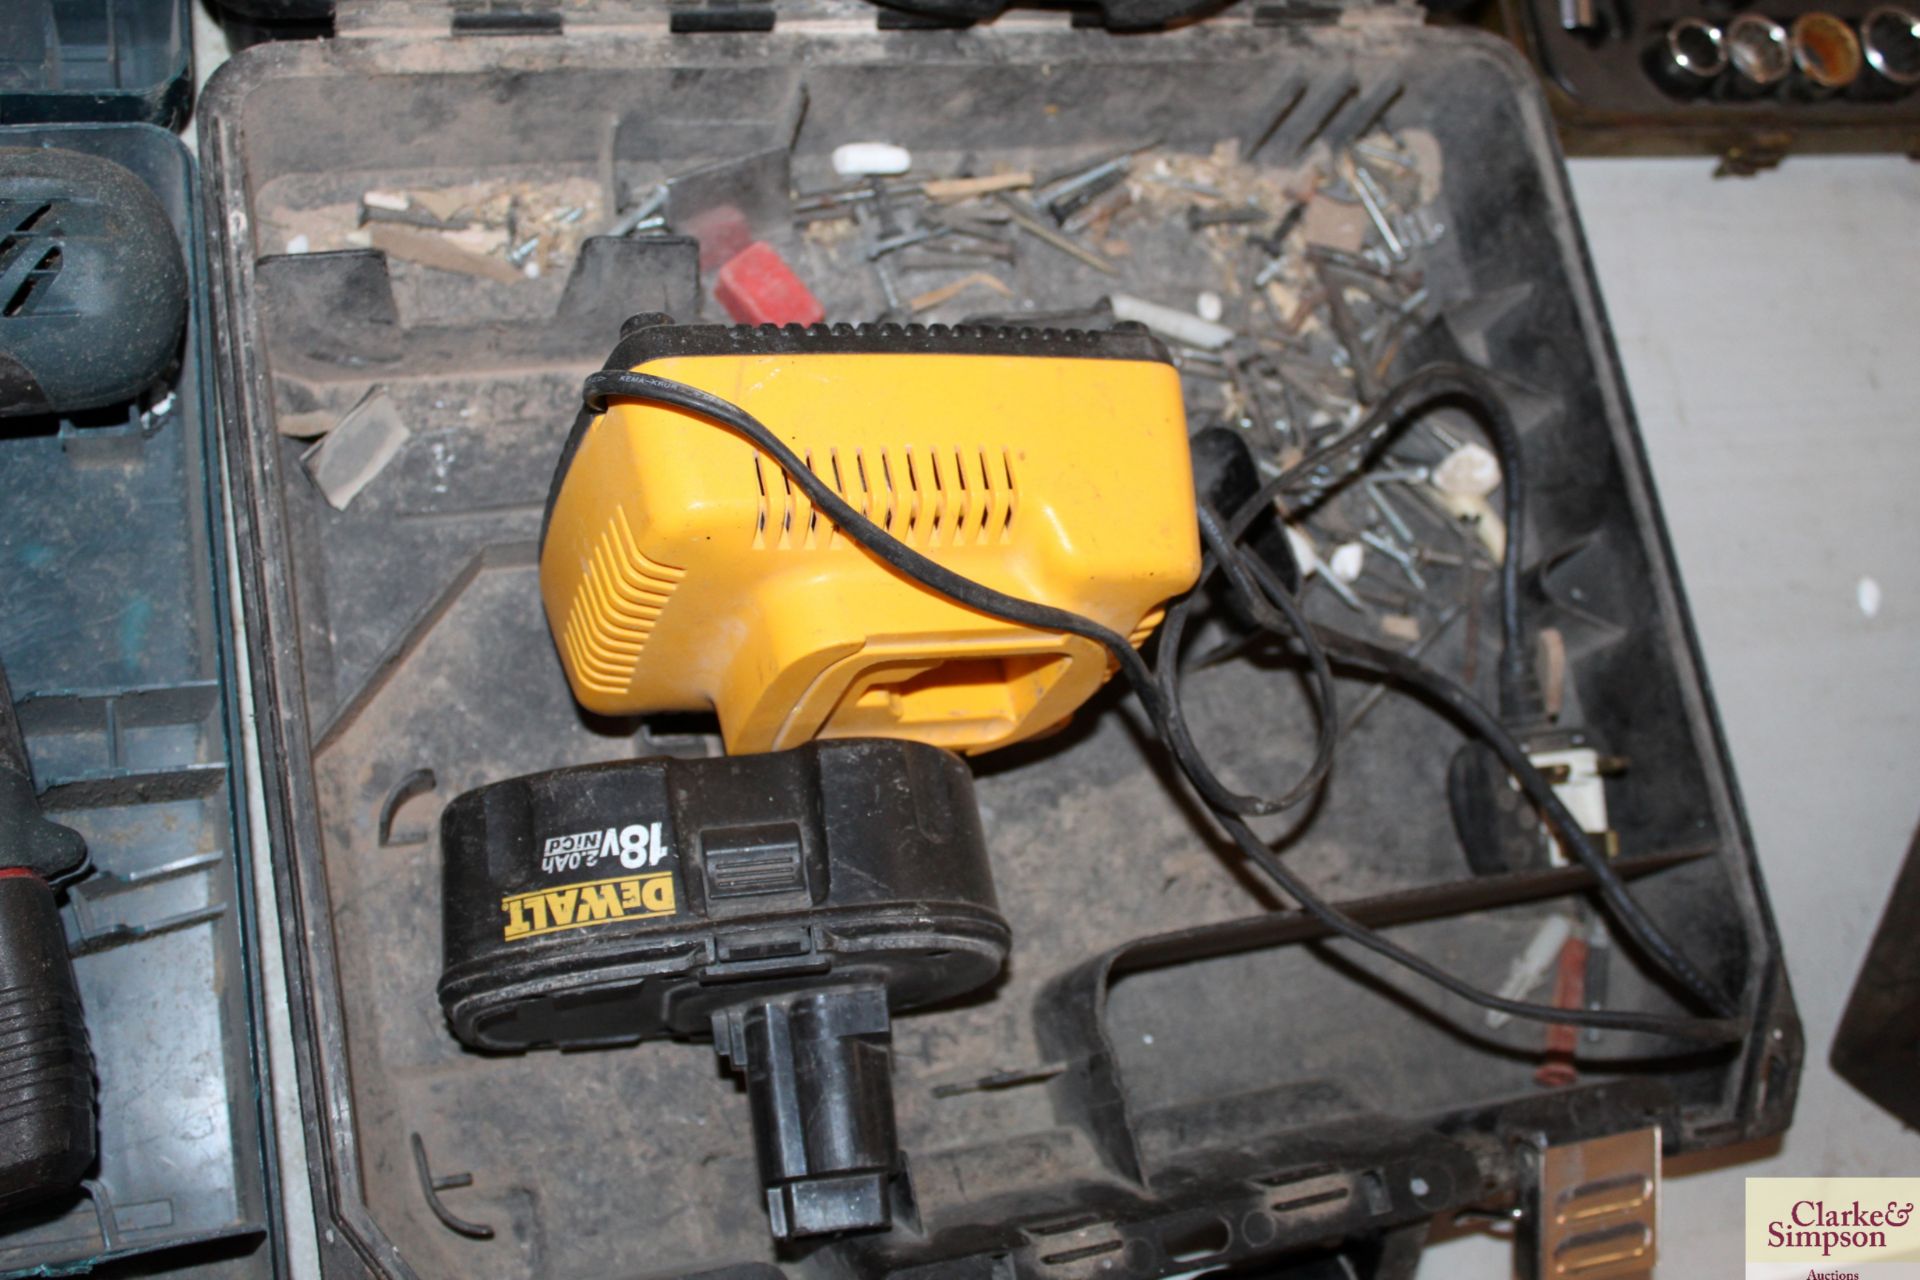 Dewalt 18v cordless drill with 2 batteries and cha - Image 3 of 3